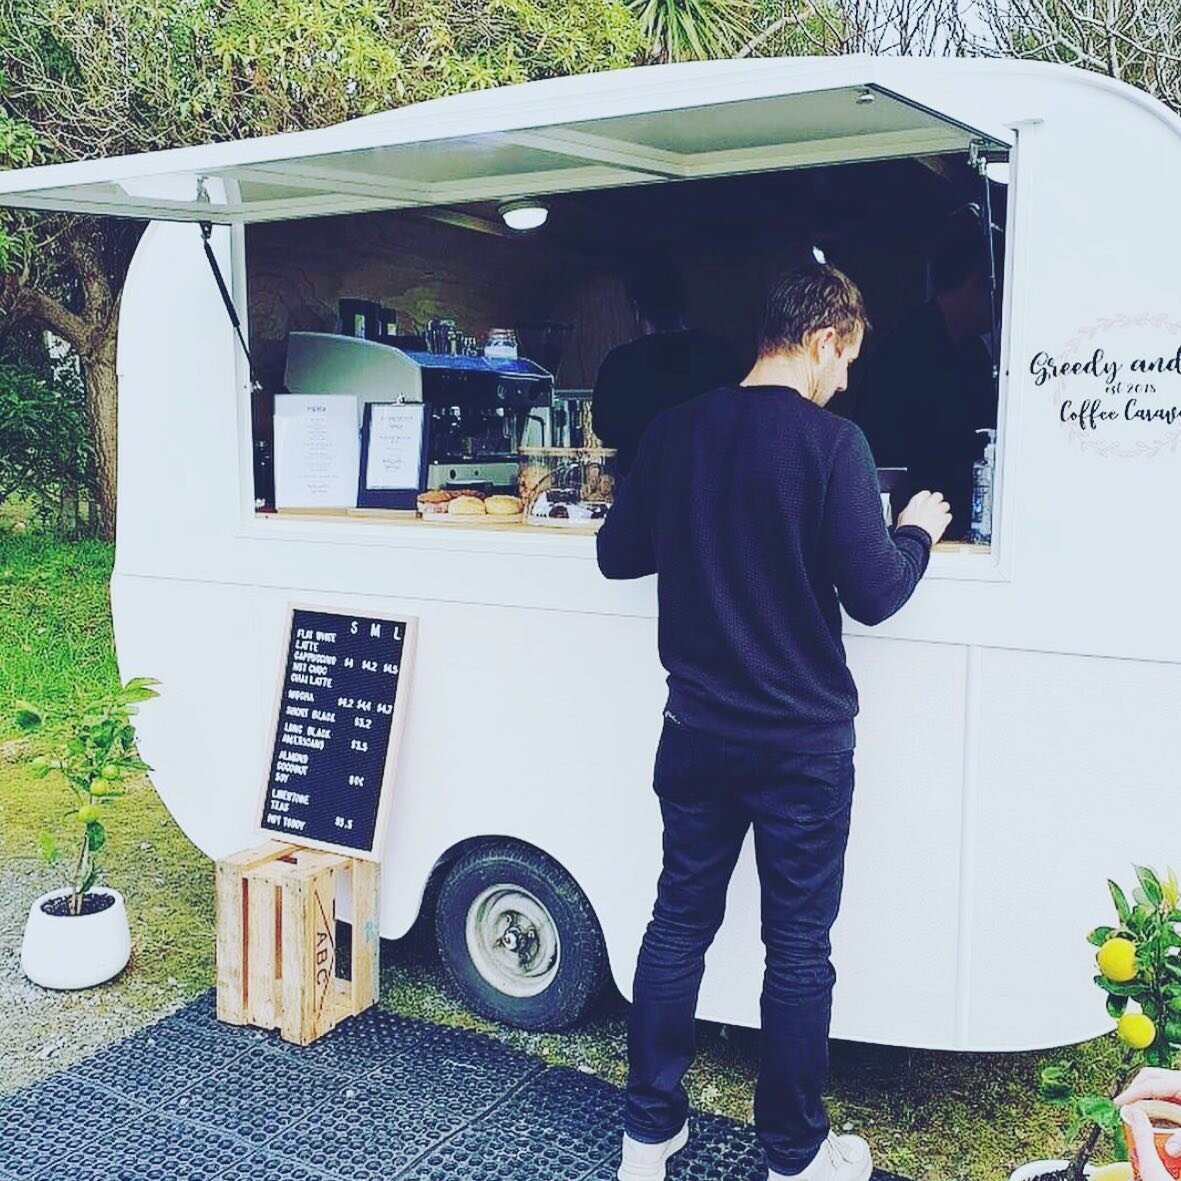 NEW STOCKIST ALERT!!!!!

The beautiful Renee ( I hope I got her name correct, the wind was howling and I couldn&rsquo;t hear properly) from @greedy_and_co coffee cart was handed our light and fluffy sourdough crumpets this morning for the gorgeous we